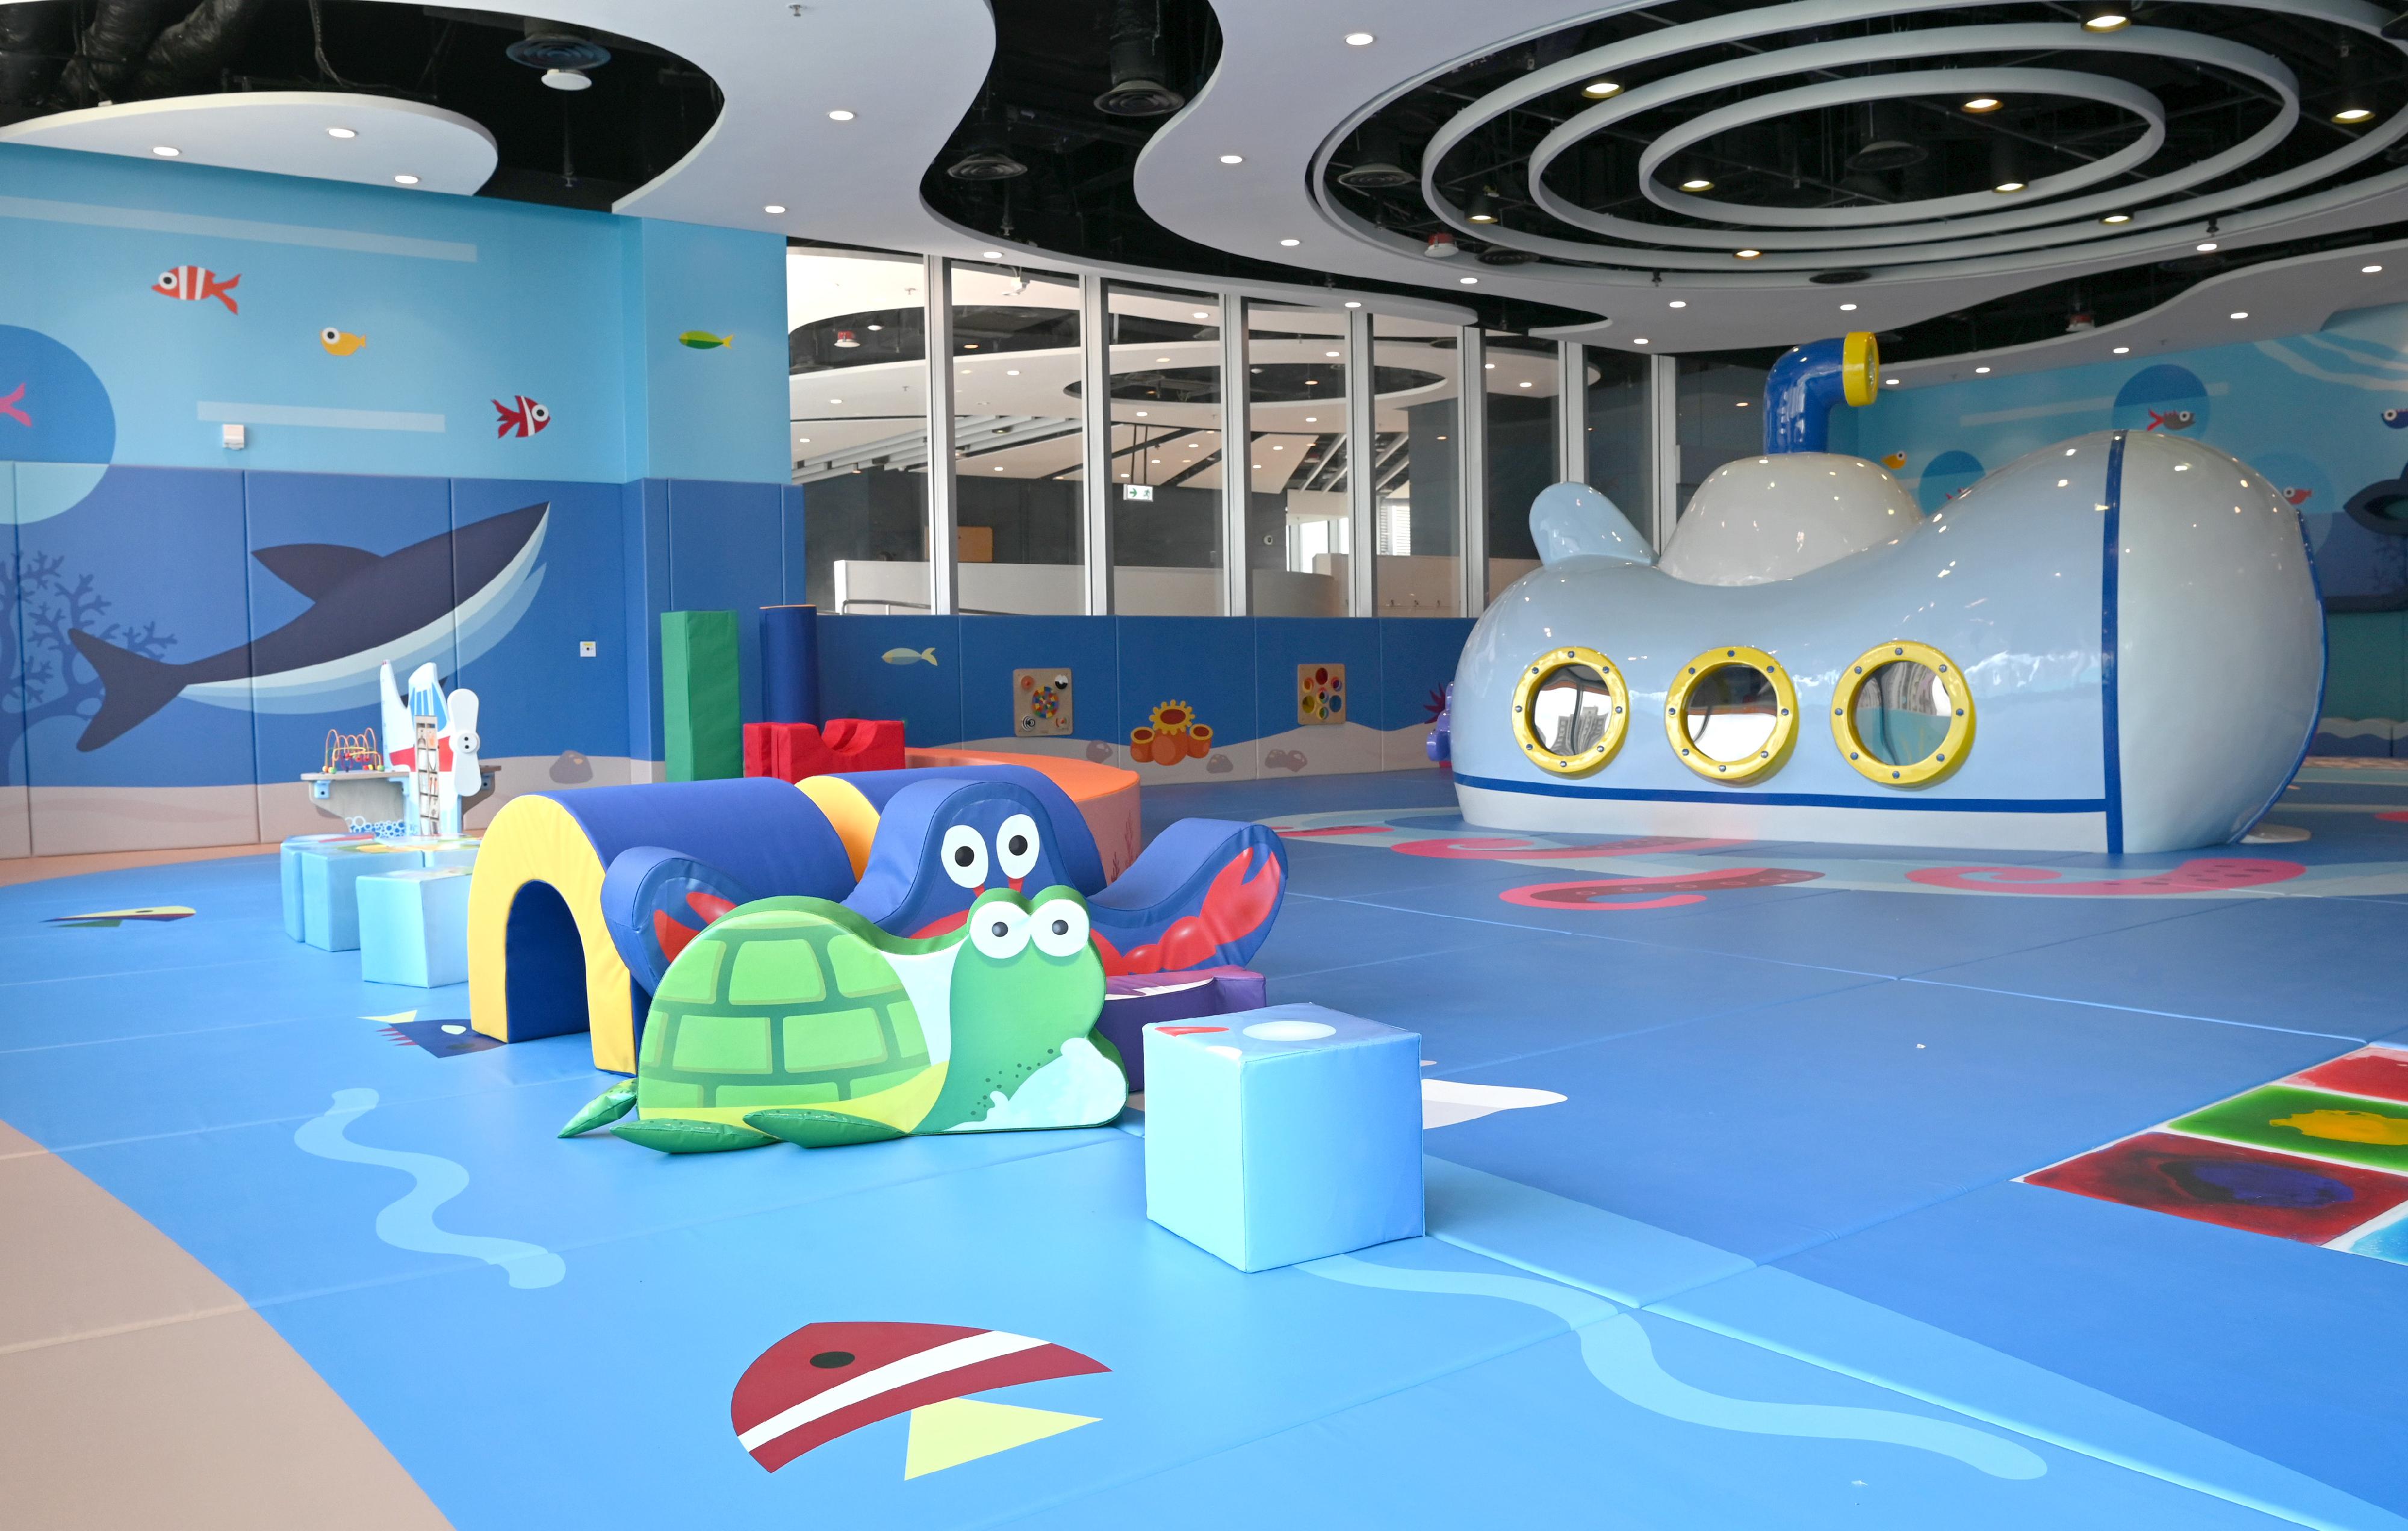 The newly built Tung Cheong Street Sports Centre, managed by the Leisure and Cultural Services Department, will open for public use on August 15 (Monday), providing a wide range of leisure and sports facilities. Photo shows the children's play room.